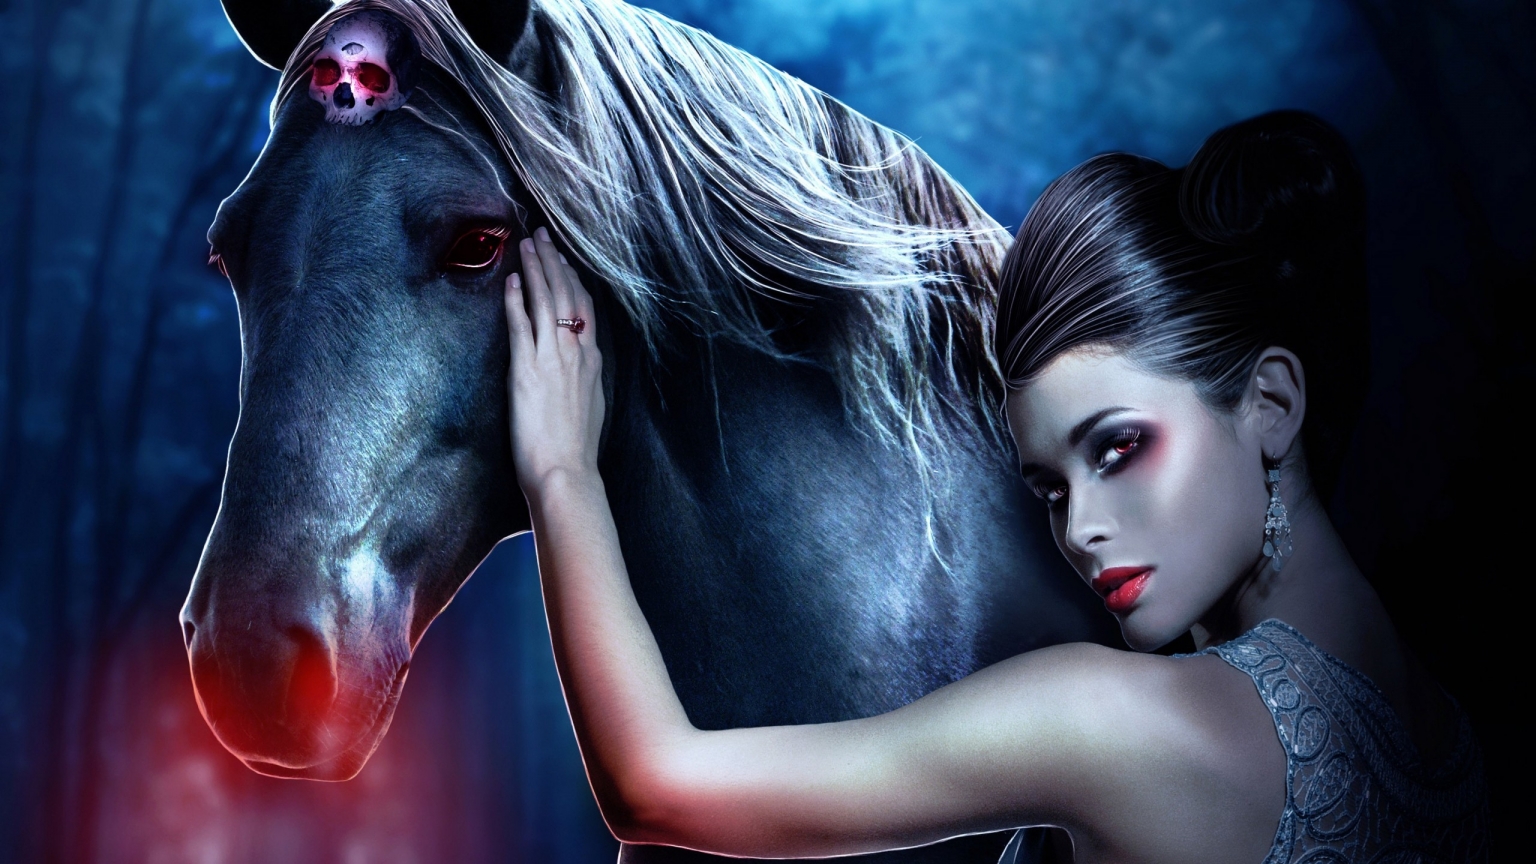 Beautiful Woman and Horse for 1536 x 864 HDTV resolution